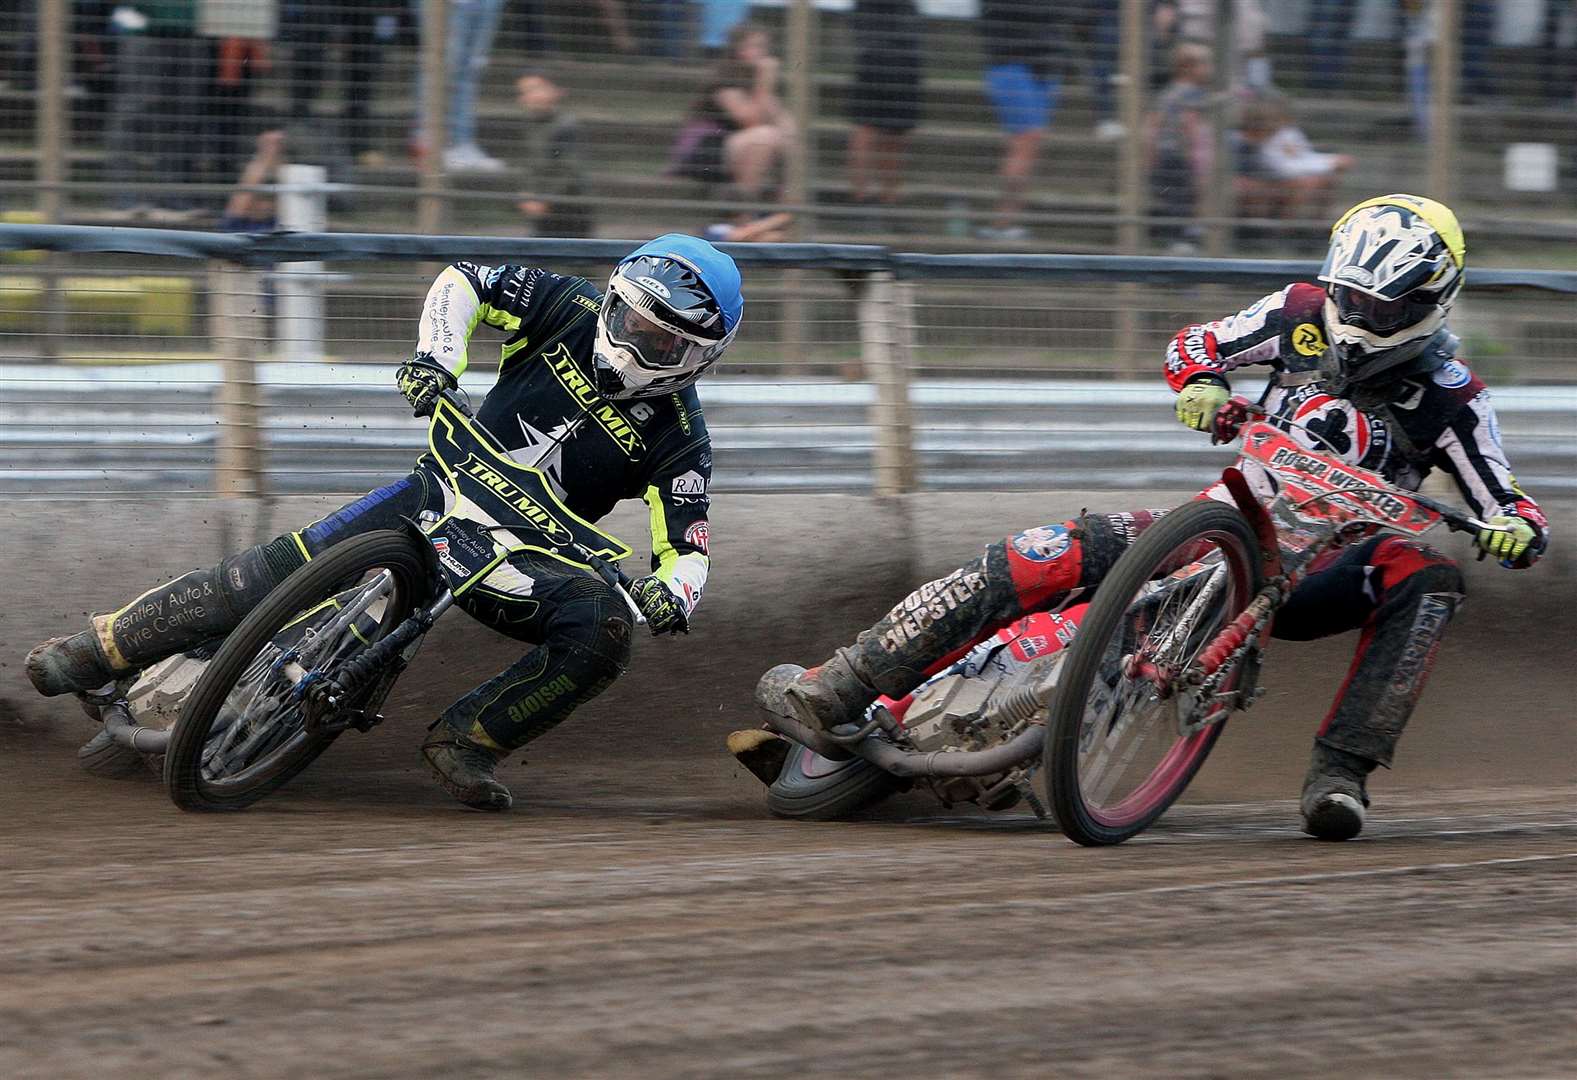 Ipswich’s Danyon Hume leads Belle Vue’s Connor Bailey at Foxhall last week. Picture: Phil Hilton